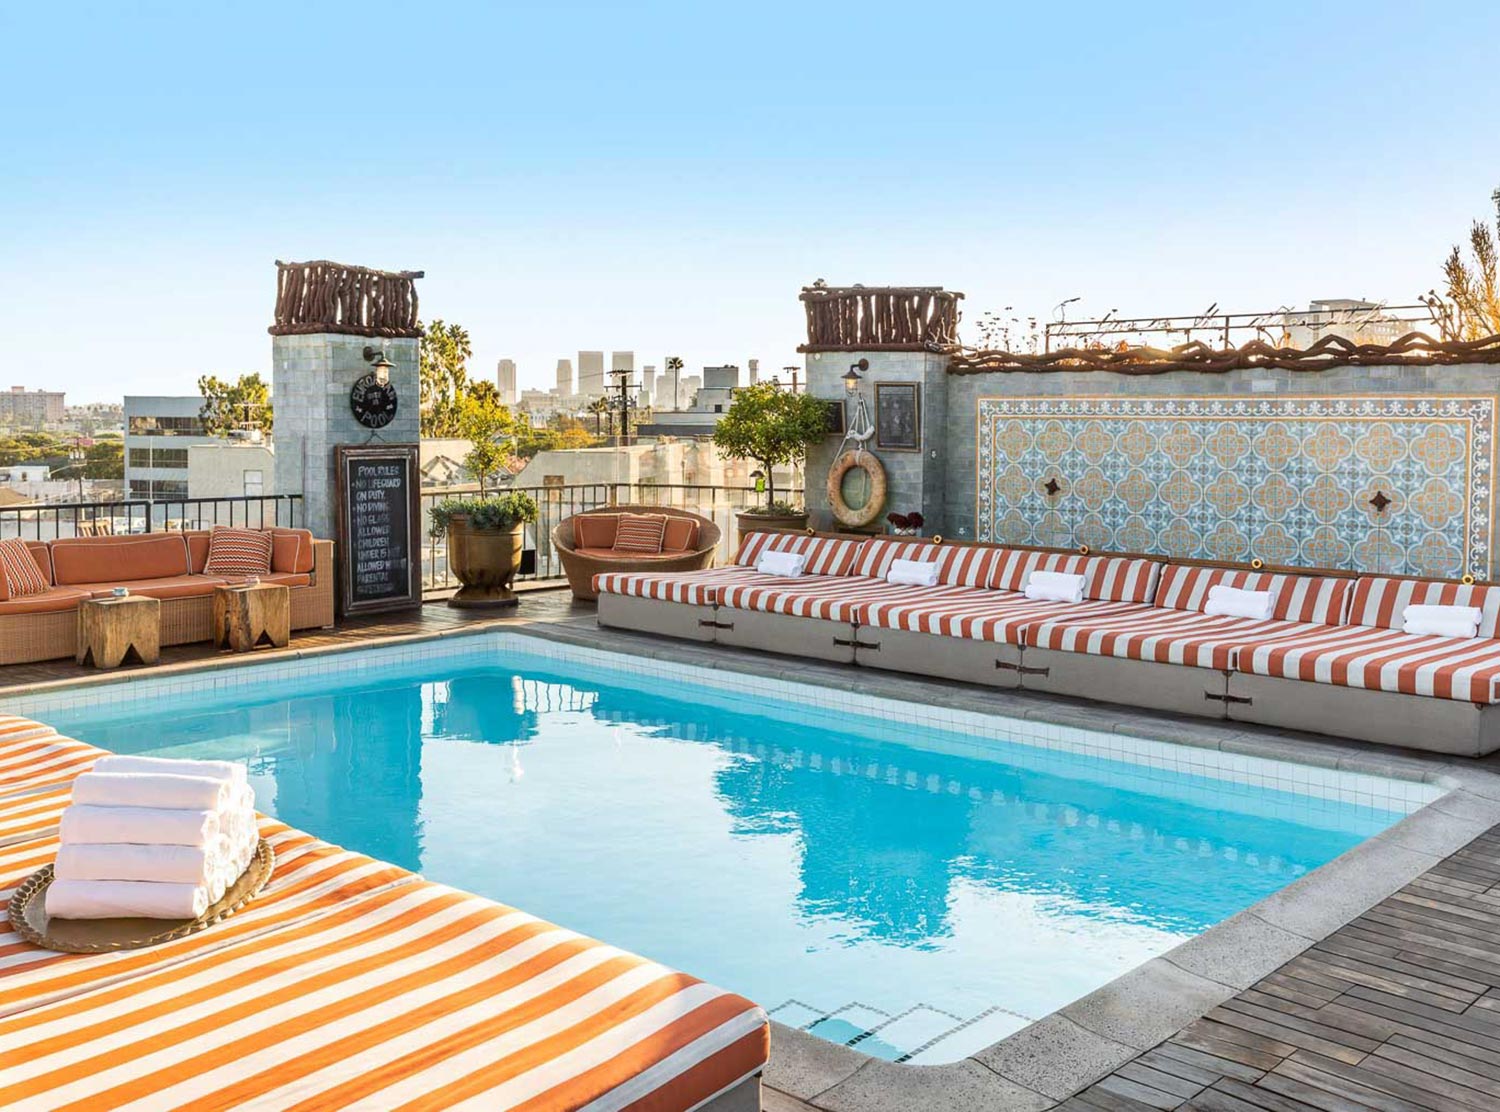 The roof deck with pool and outdoor fireplace is one of the coolest hangs in all of LA